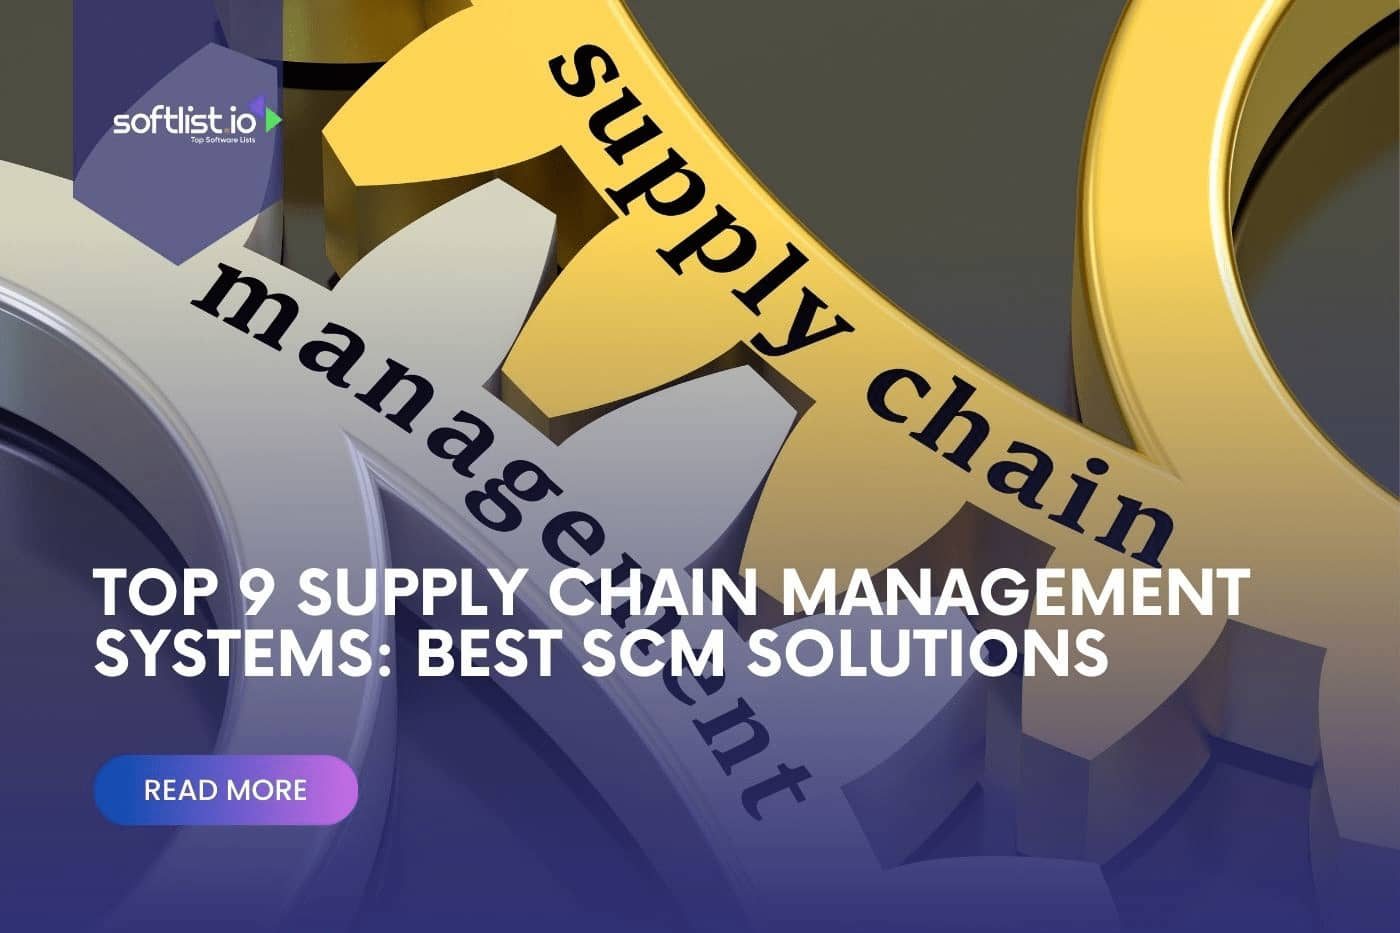 Top 9 Supply Chain Management Systems (SCM)